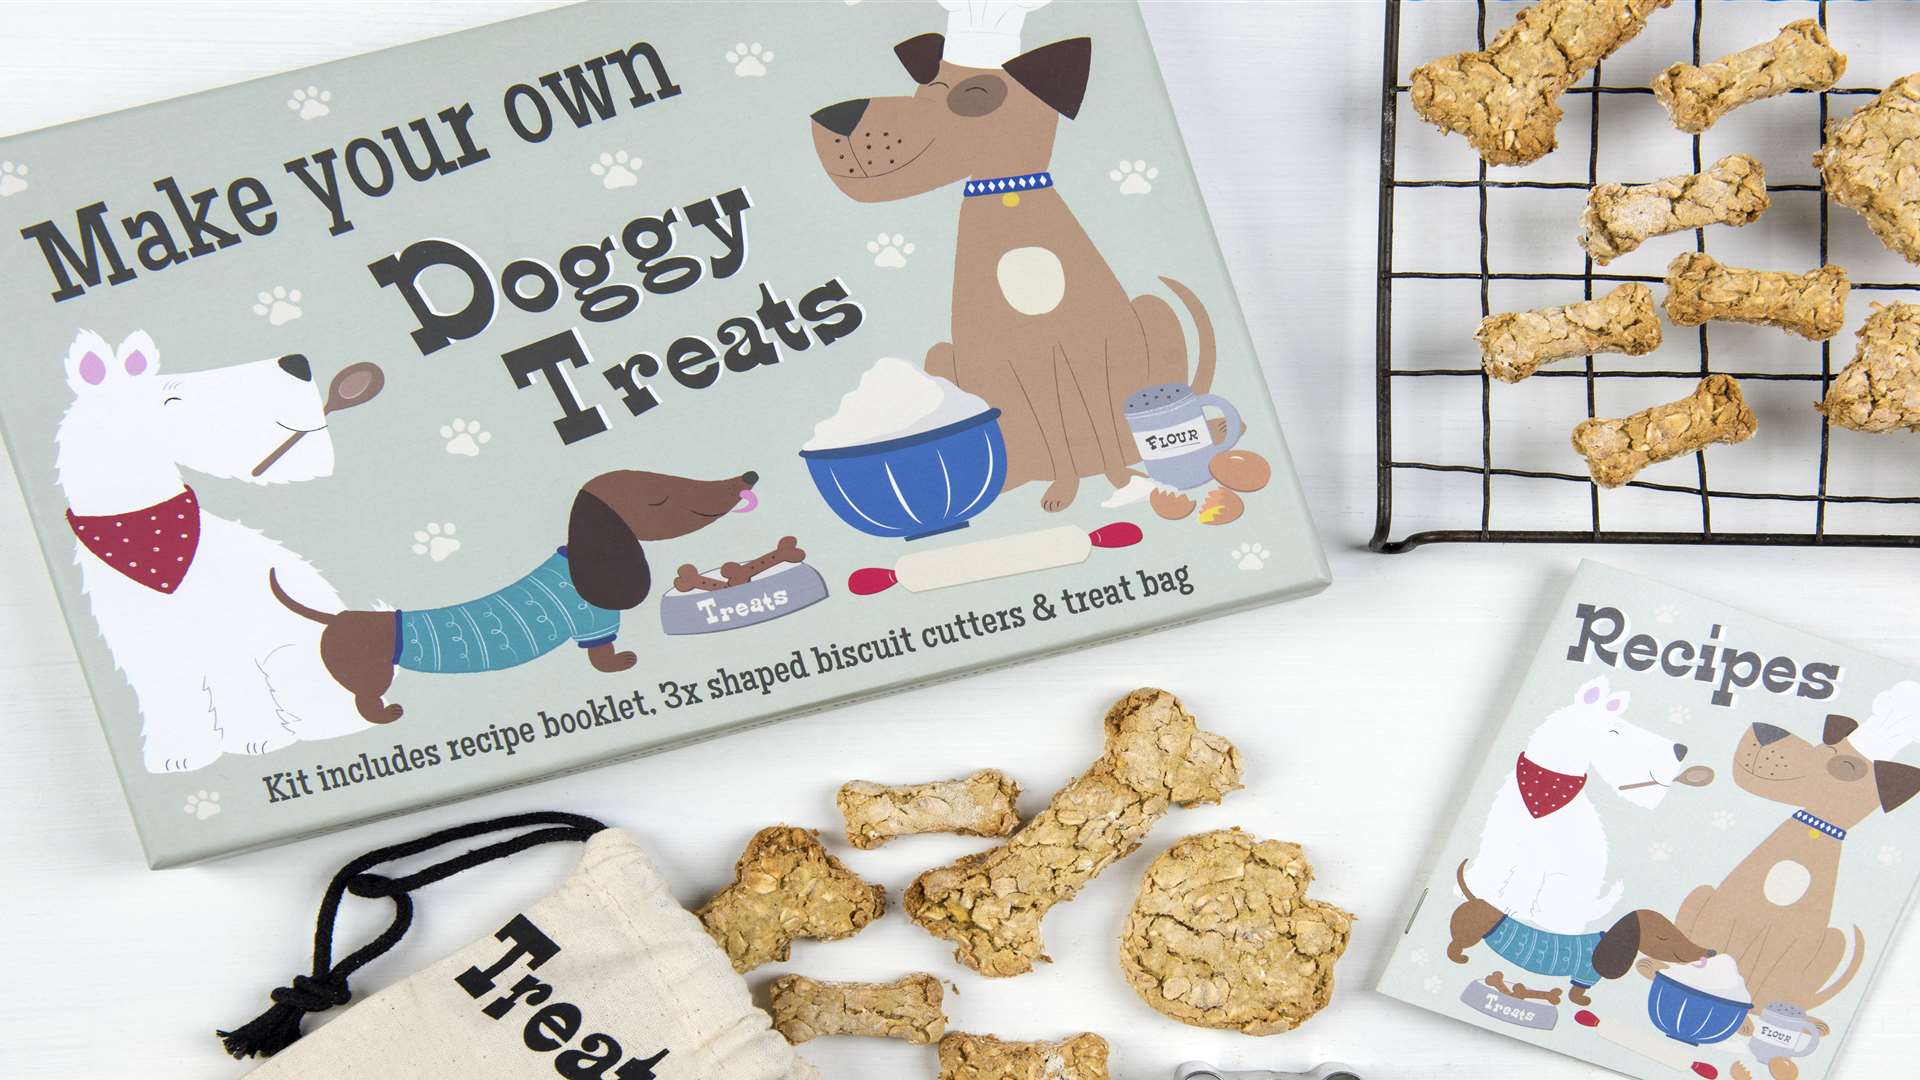 You can even make your own treats for your dog now!